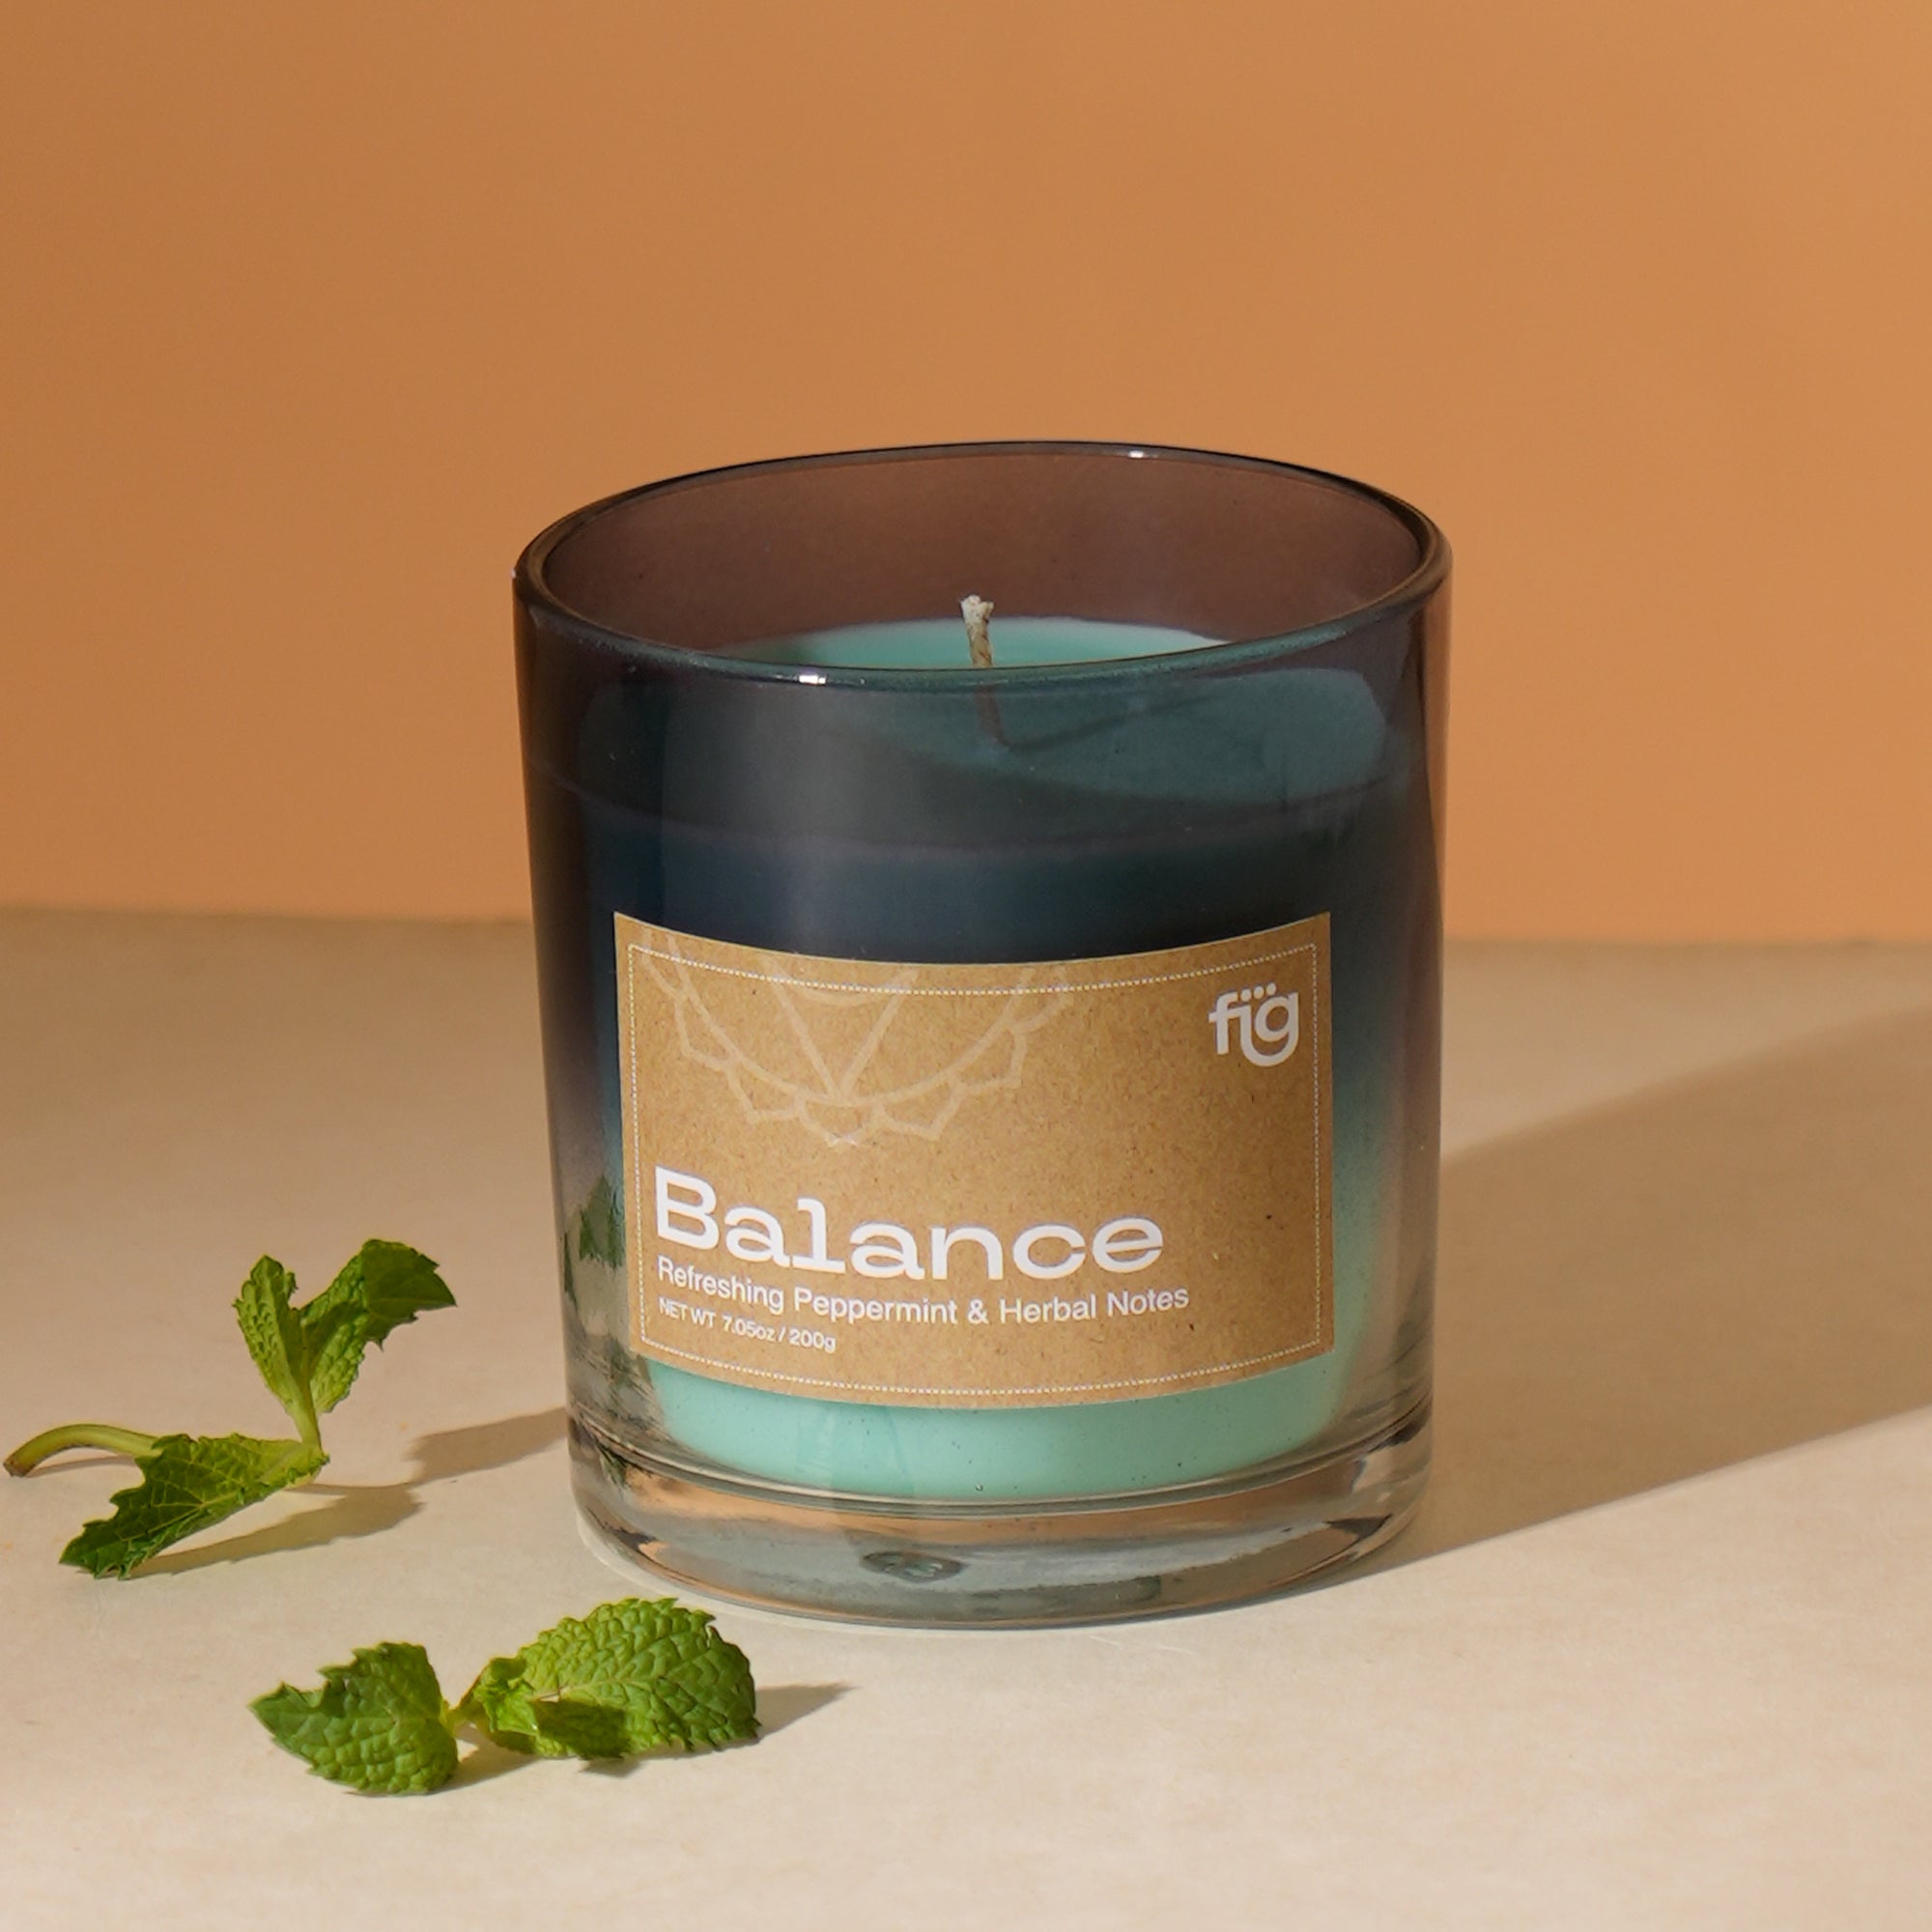 Balance Peppermint Vegan Wax Candle - Palm Wax Scented